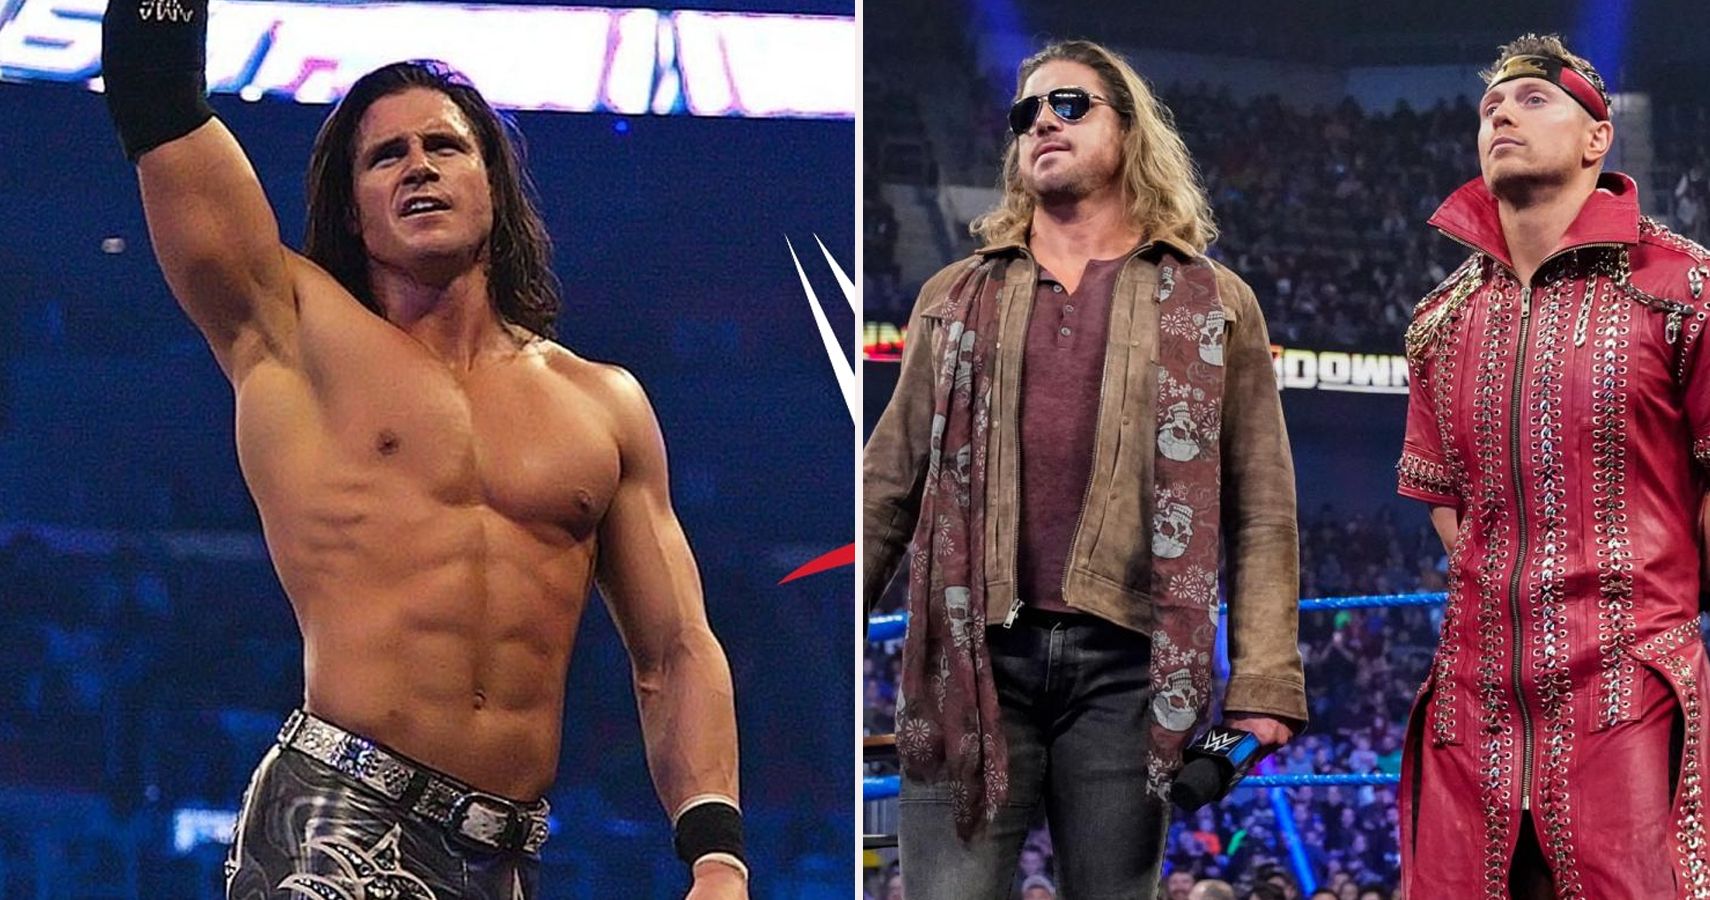 John Morrison has returned to WWE and reunited with the Miz